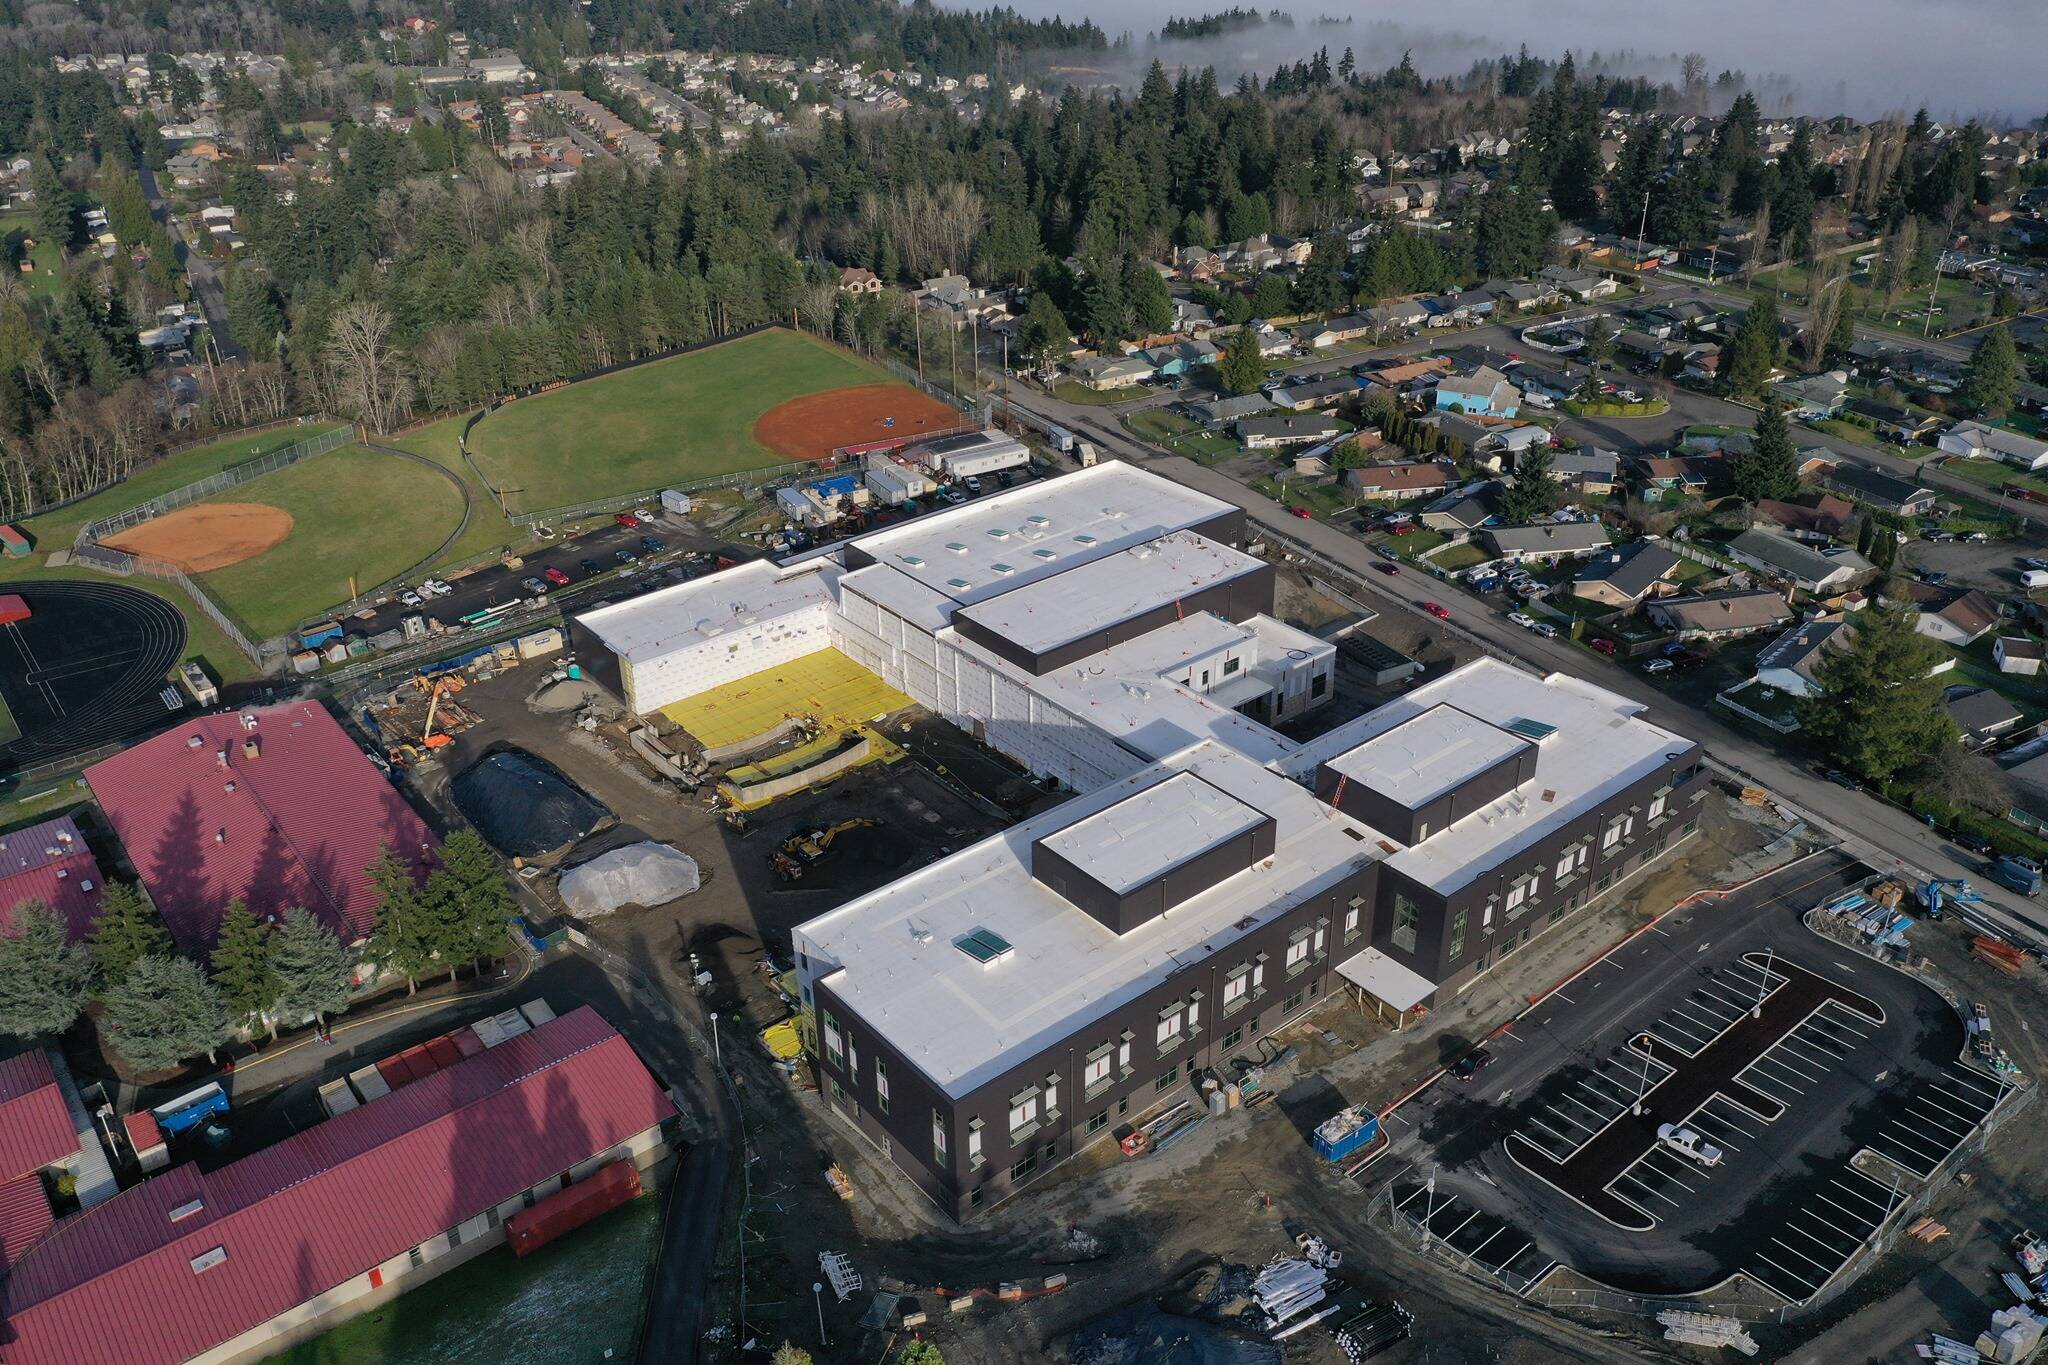 Thomas Jefferson was recently rebuilt and sits next to the former high school along S. 288th Street in Auburn. Federal Way Public Schools photo